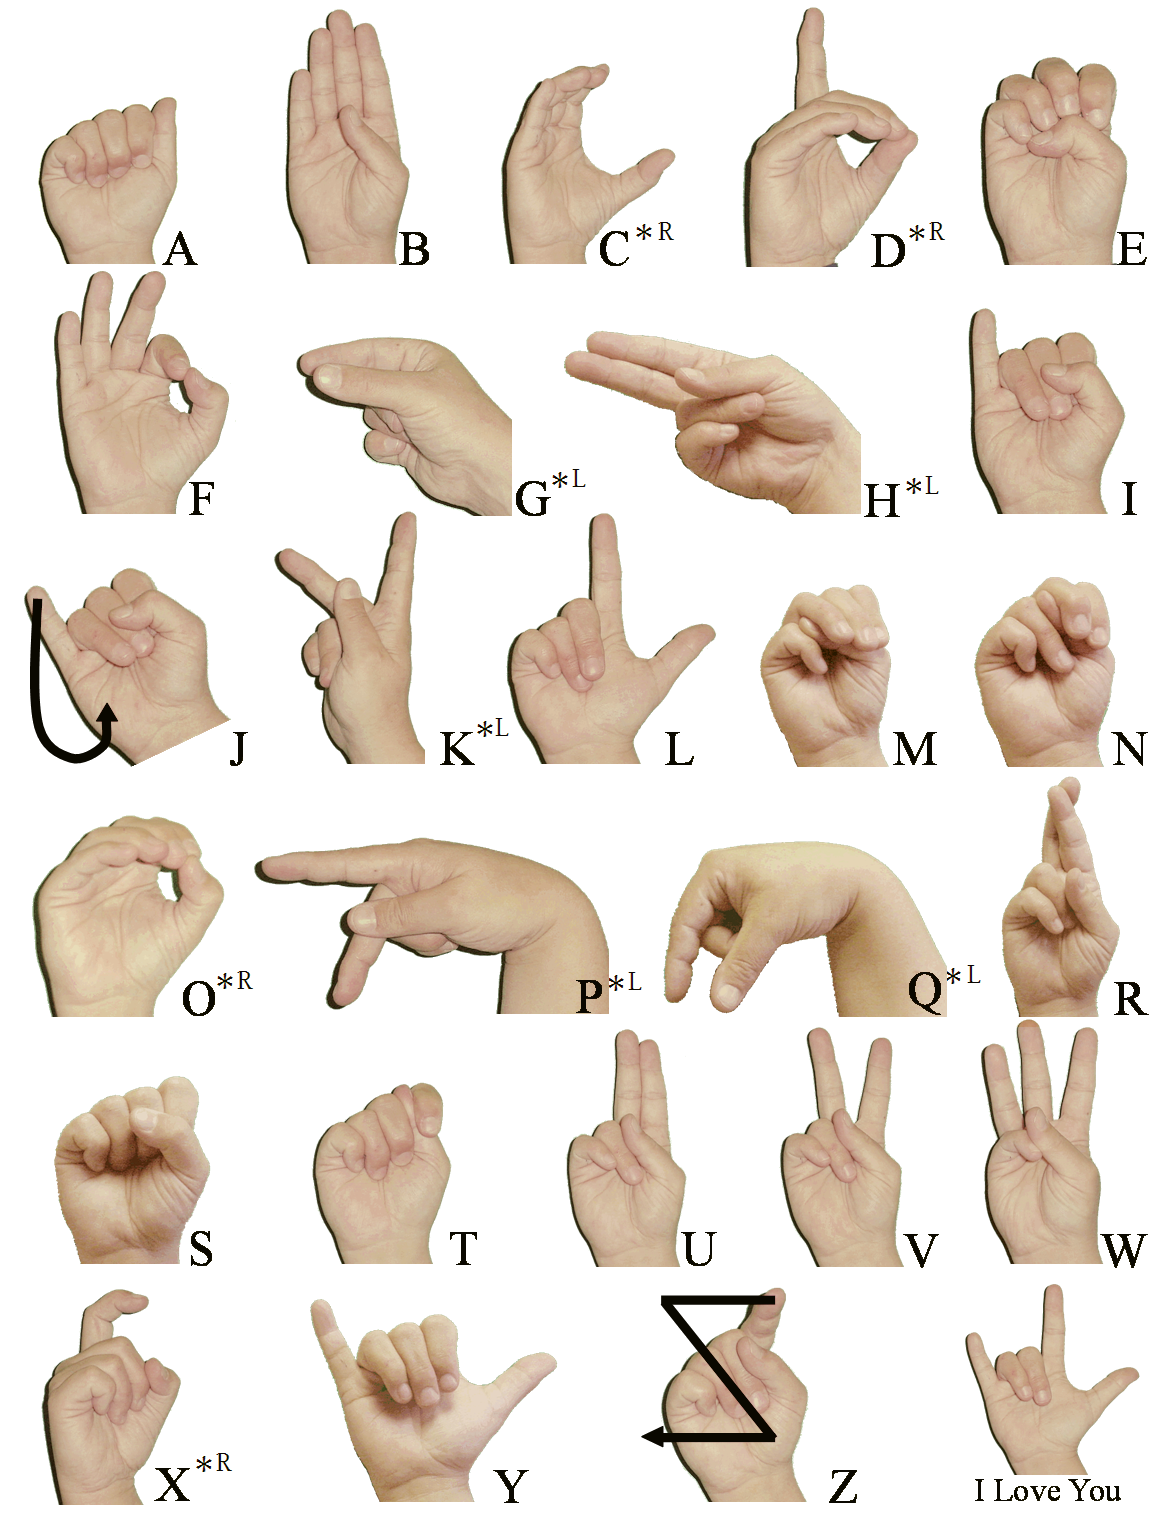 Weekend project: sign language and static-gesture recognition using